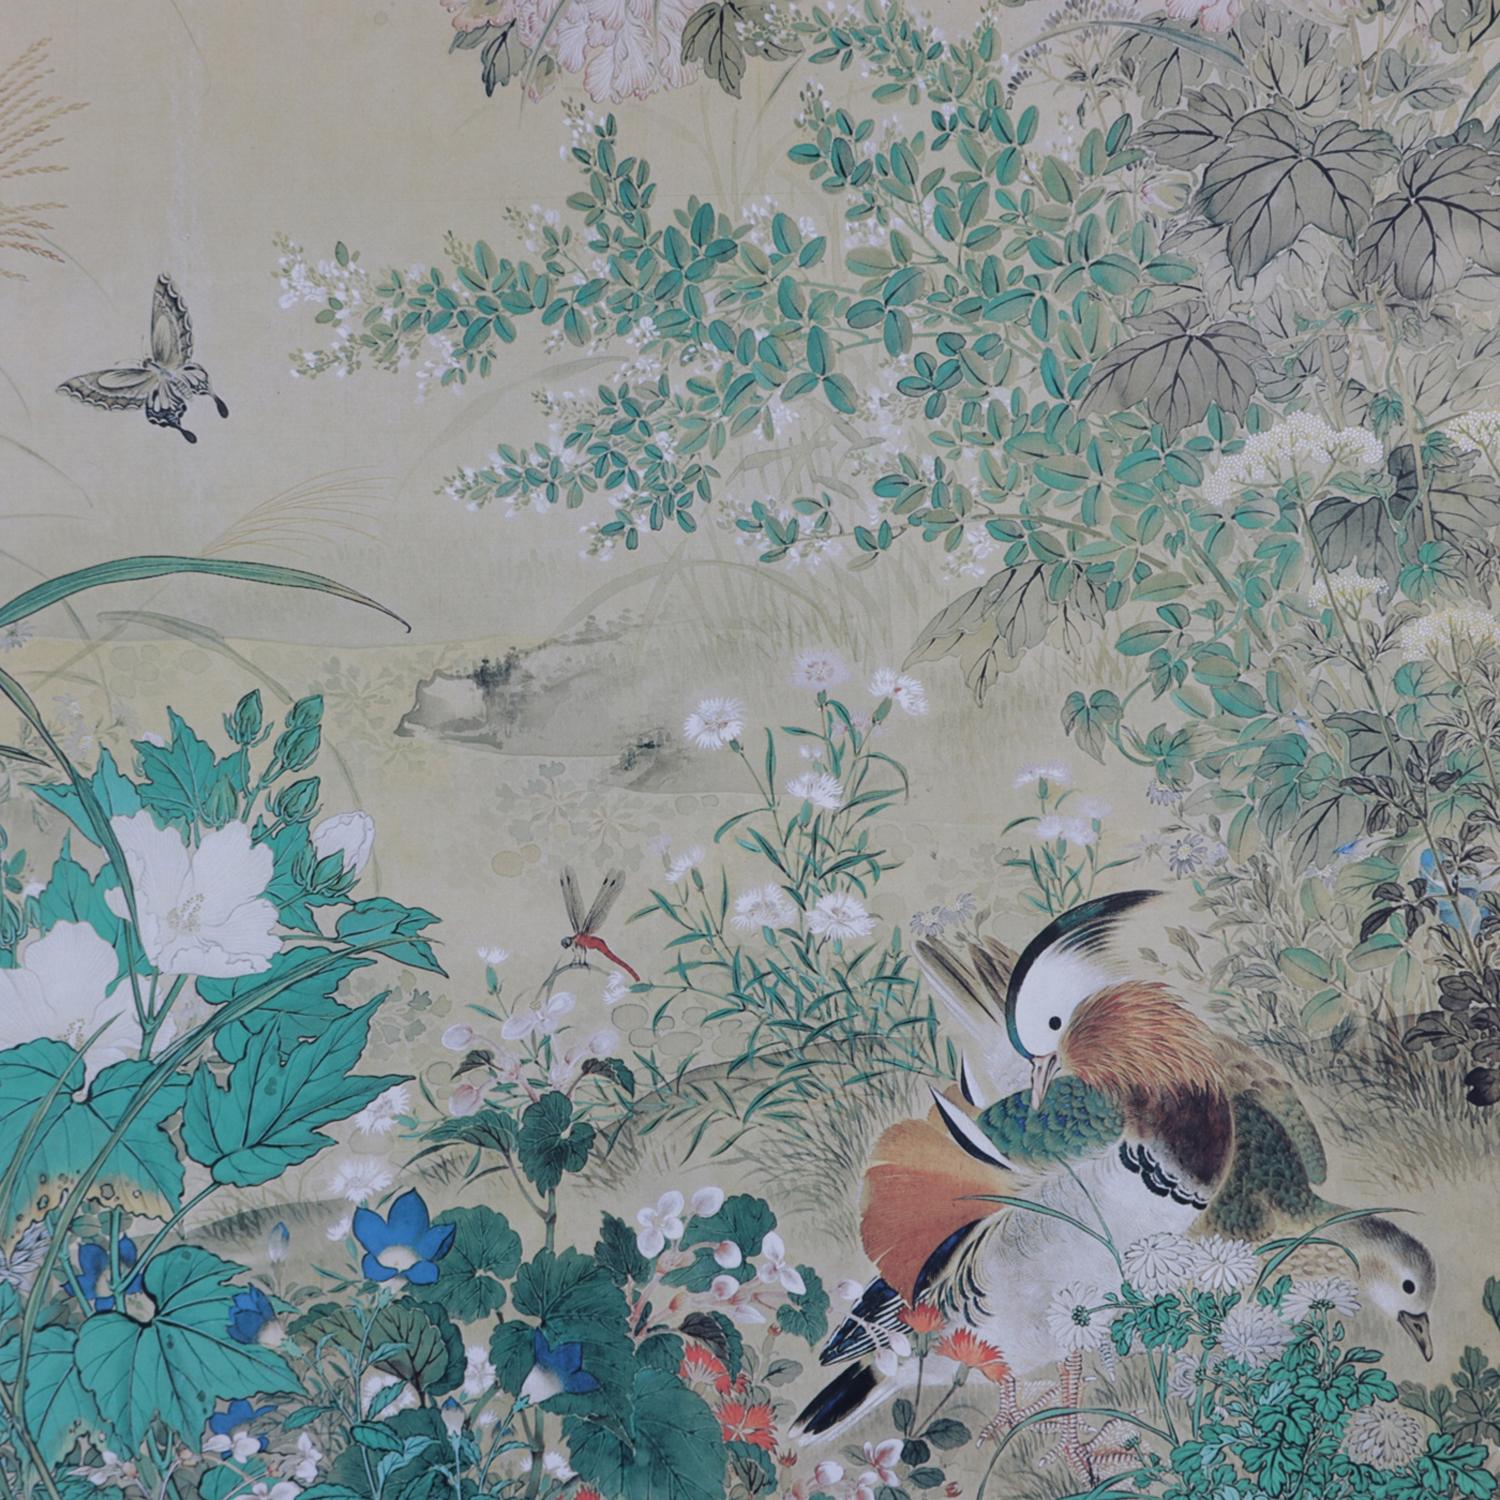 Vintage framed and matted Asian woodblock print depicts birds, flowers and butterflies in garden setting, chop mark signed and stamped lower right, circa 1940.

Measures: Frame 31.25